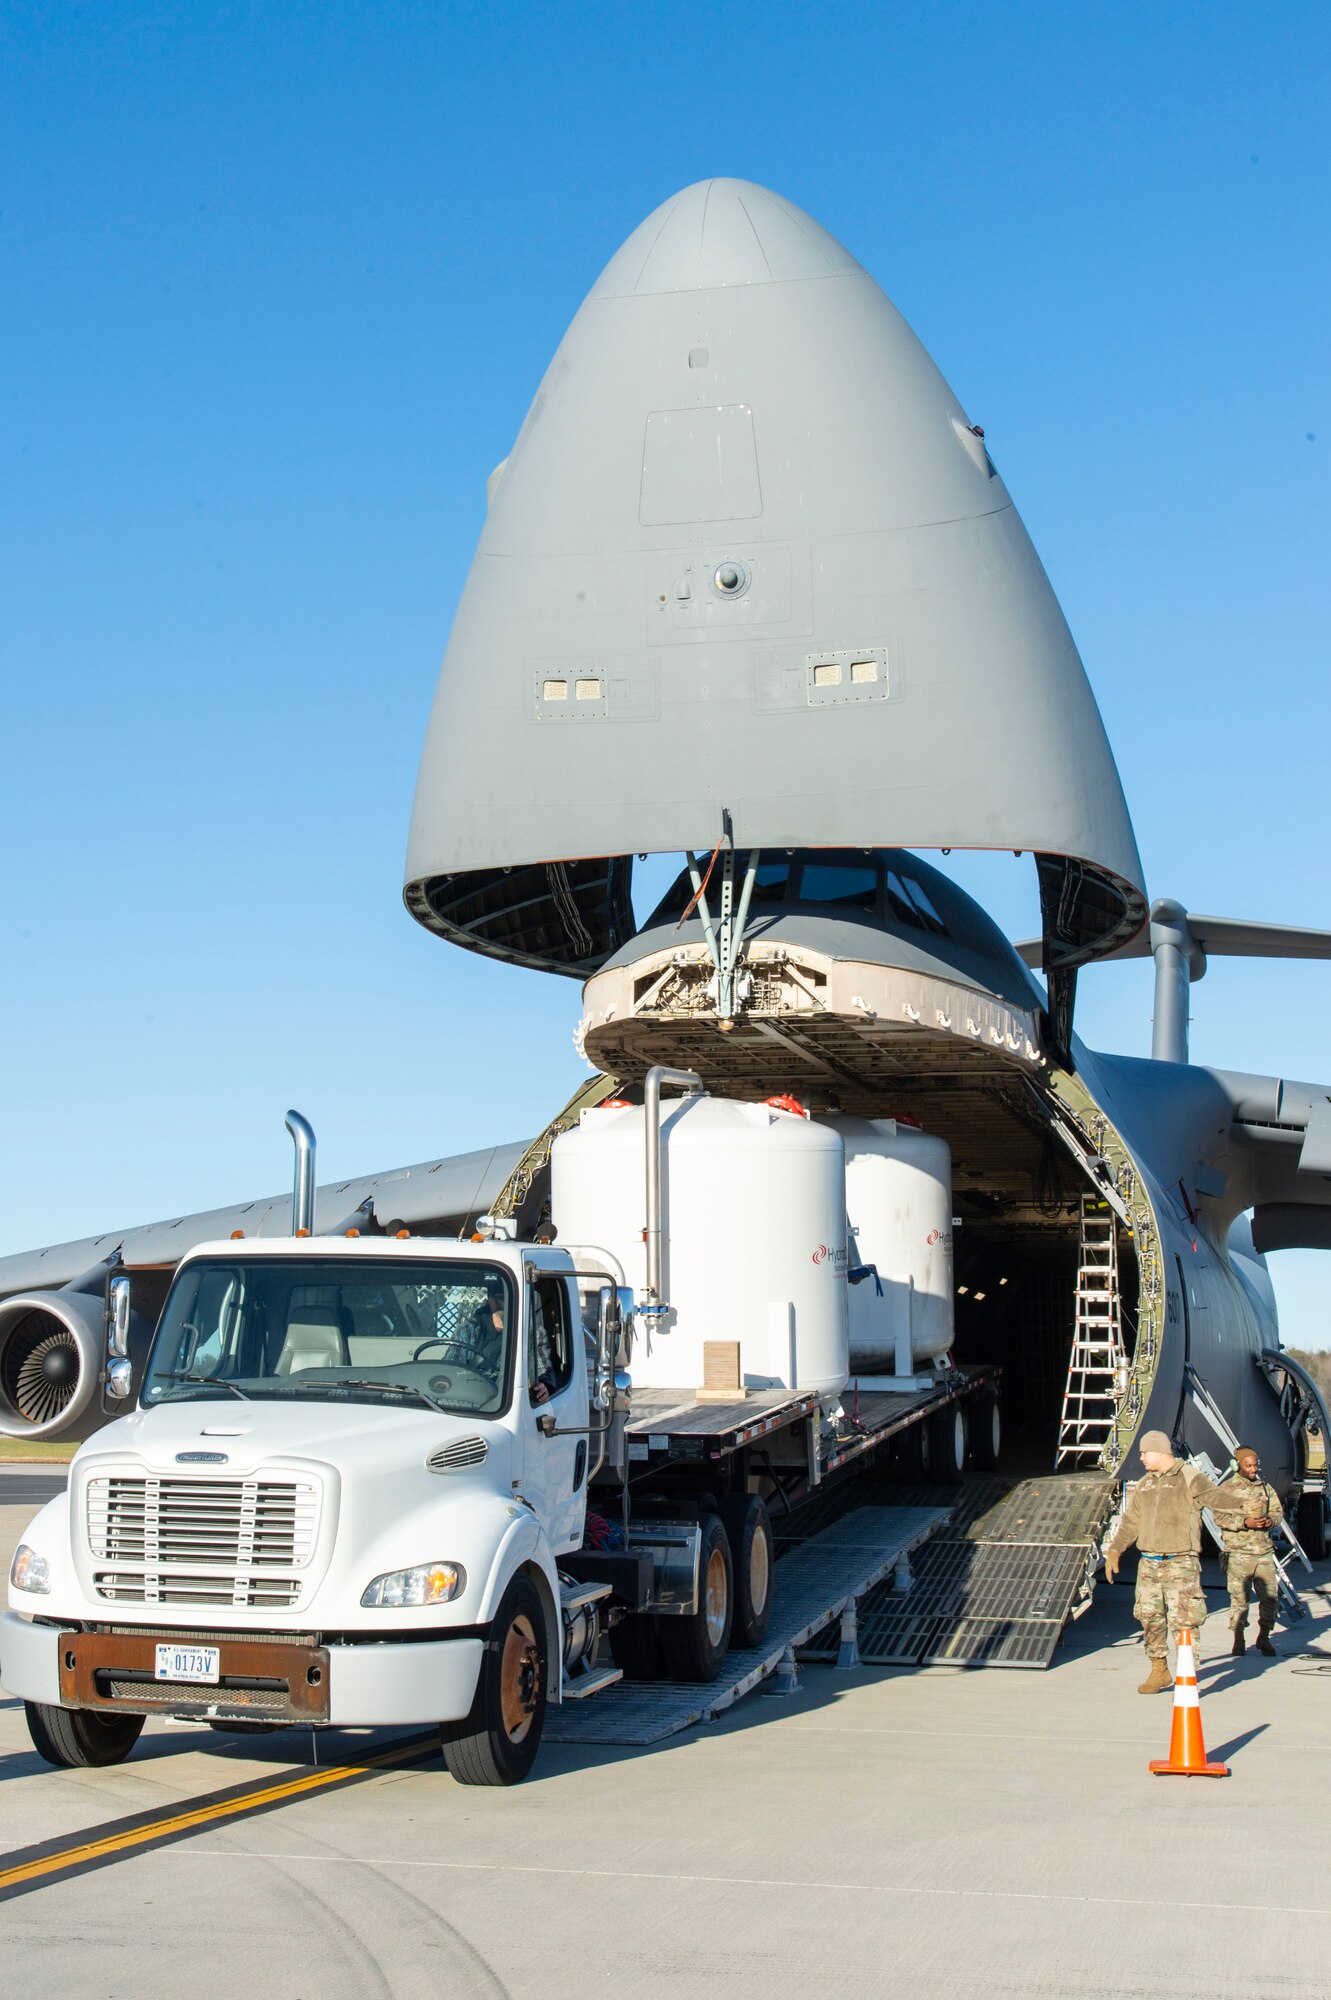 Tony Forcier, 436th Aerial Port Squadron ramp services foreman, backs up a trailer loaded with water filtration equipment onto a C-5M Super Galaxy at Dover Air Force Base, Delaware, Dec. 20, 2021. An aircrew from the 9th Airlift Squadron flew the equipment to Joint Base Pearl Harbor-Hickam (JBPHH), Hawaii. The JBPHH water quality recovery is a joint U.S. military initiative working closely with the State of Hawaii, Department of Health, Honolulu Board of Water Supply, U.S. government and independent organizations to restore a safe water delivery system to JBPHH military housing communities through testing, treatment, and repair. For detailed information, including available resources and locations, and news, go to www.navy.mil/jointbasewater.   (U.S. Air Force photo by Roland Balik)